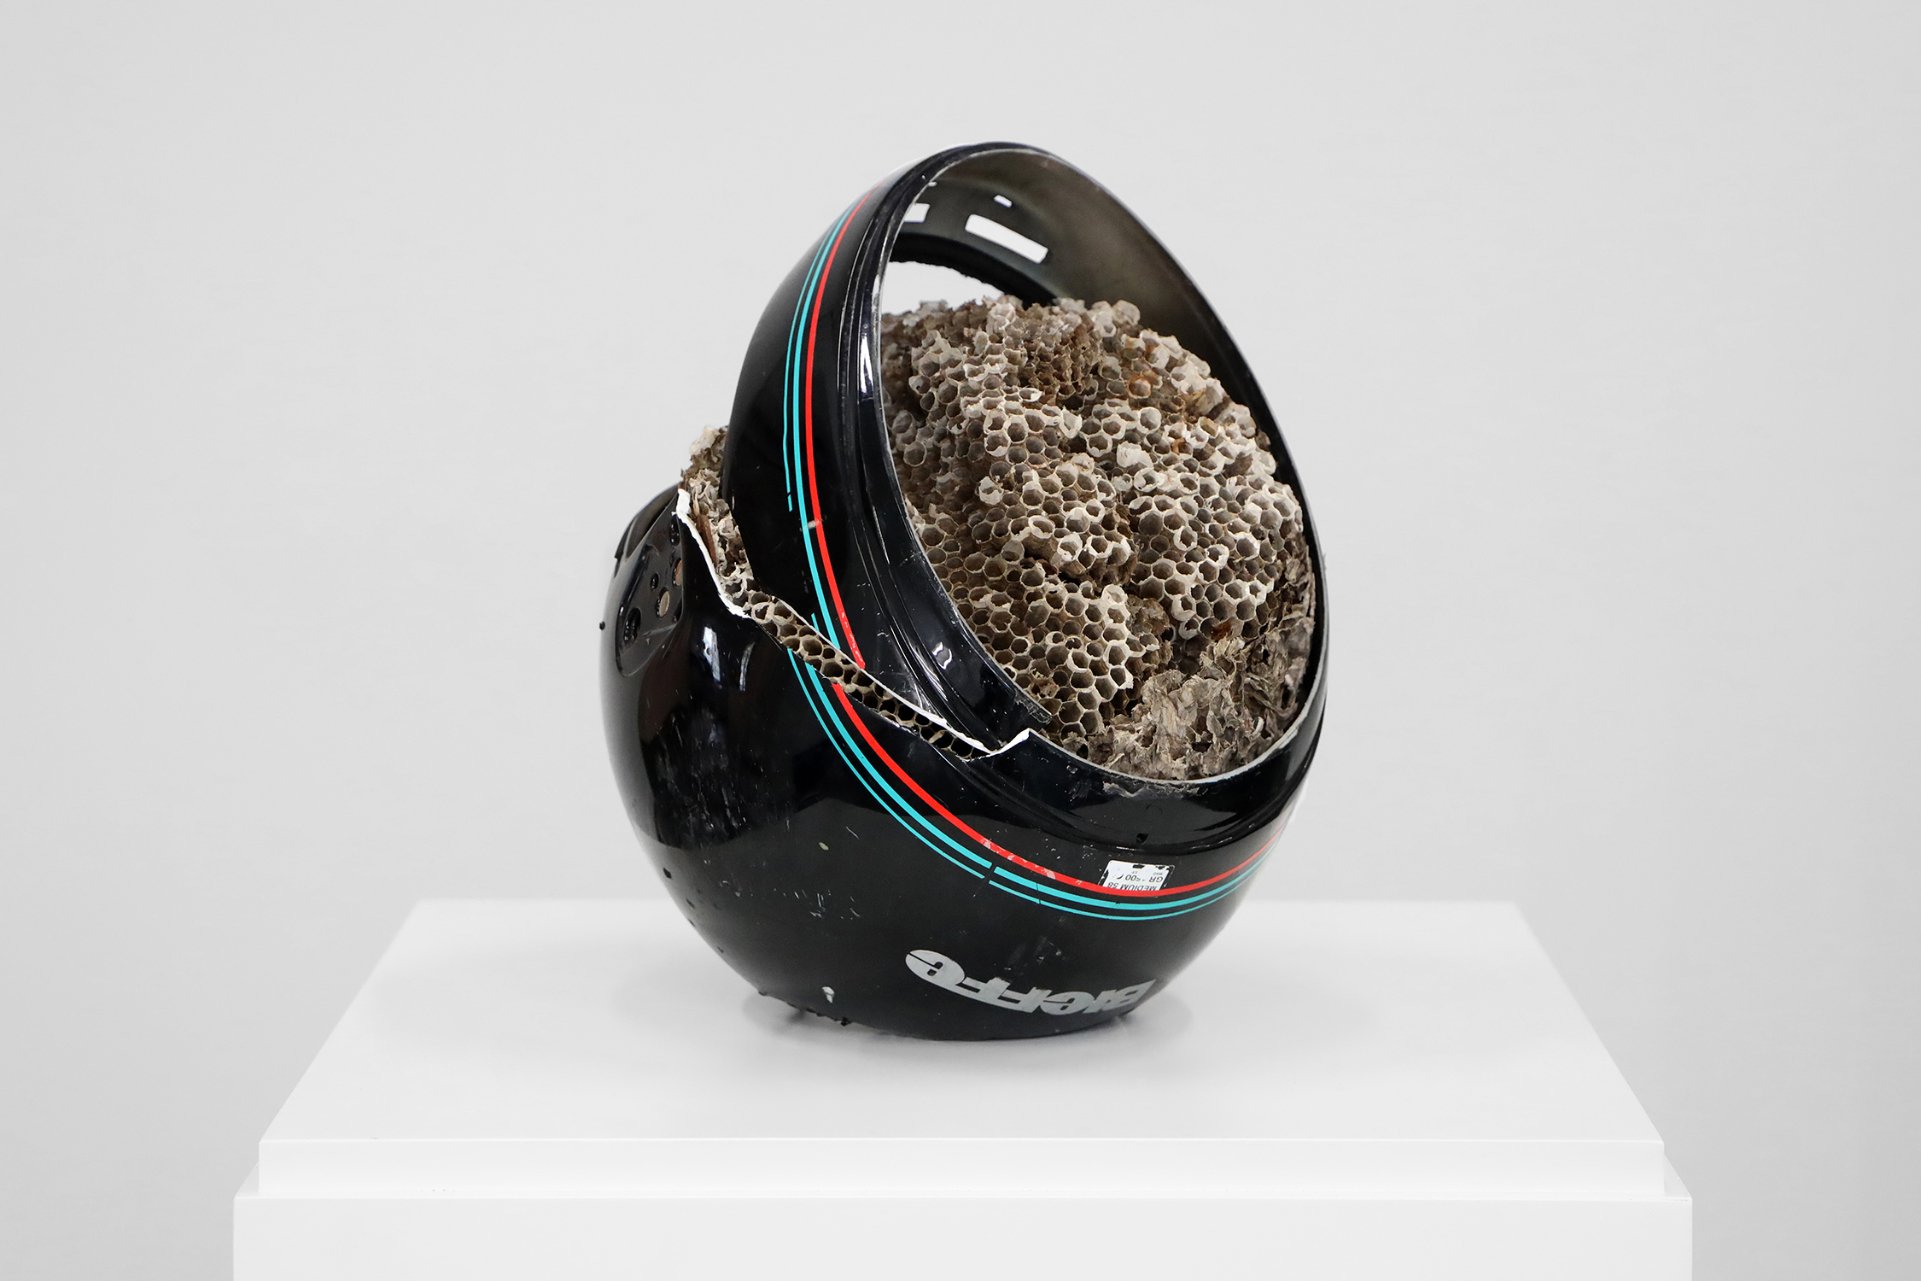  Nicolás Lamas  Network collapse  (2019) Motorcycle helmet and wasp nest  Courtesy of Meessen De Clercq  Copyright of the artist Photo: Josépha Blanchet  